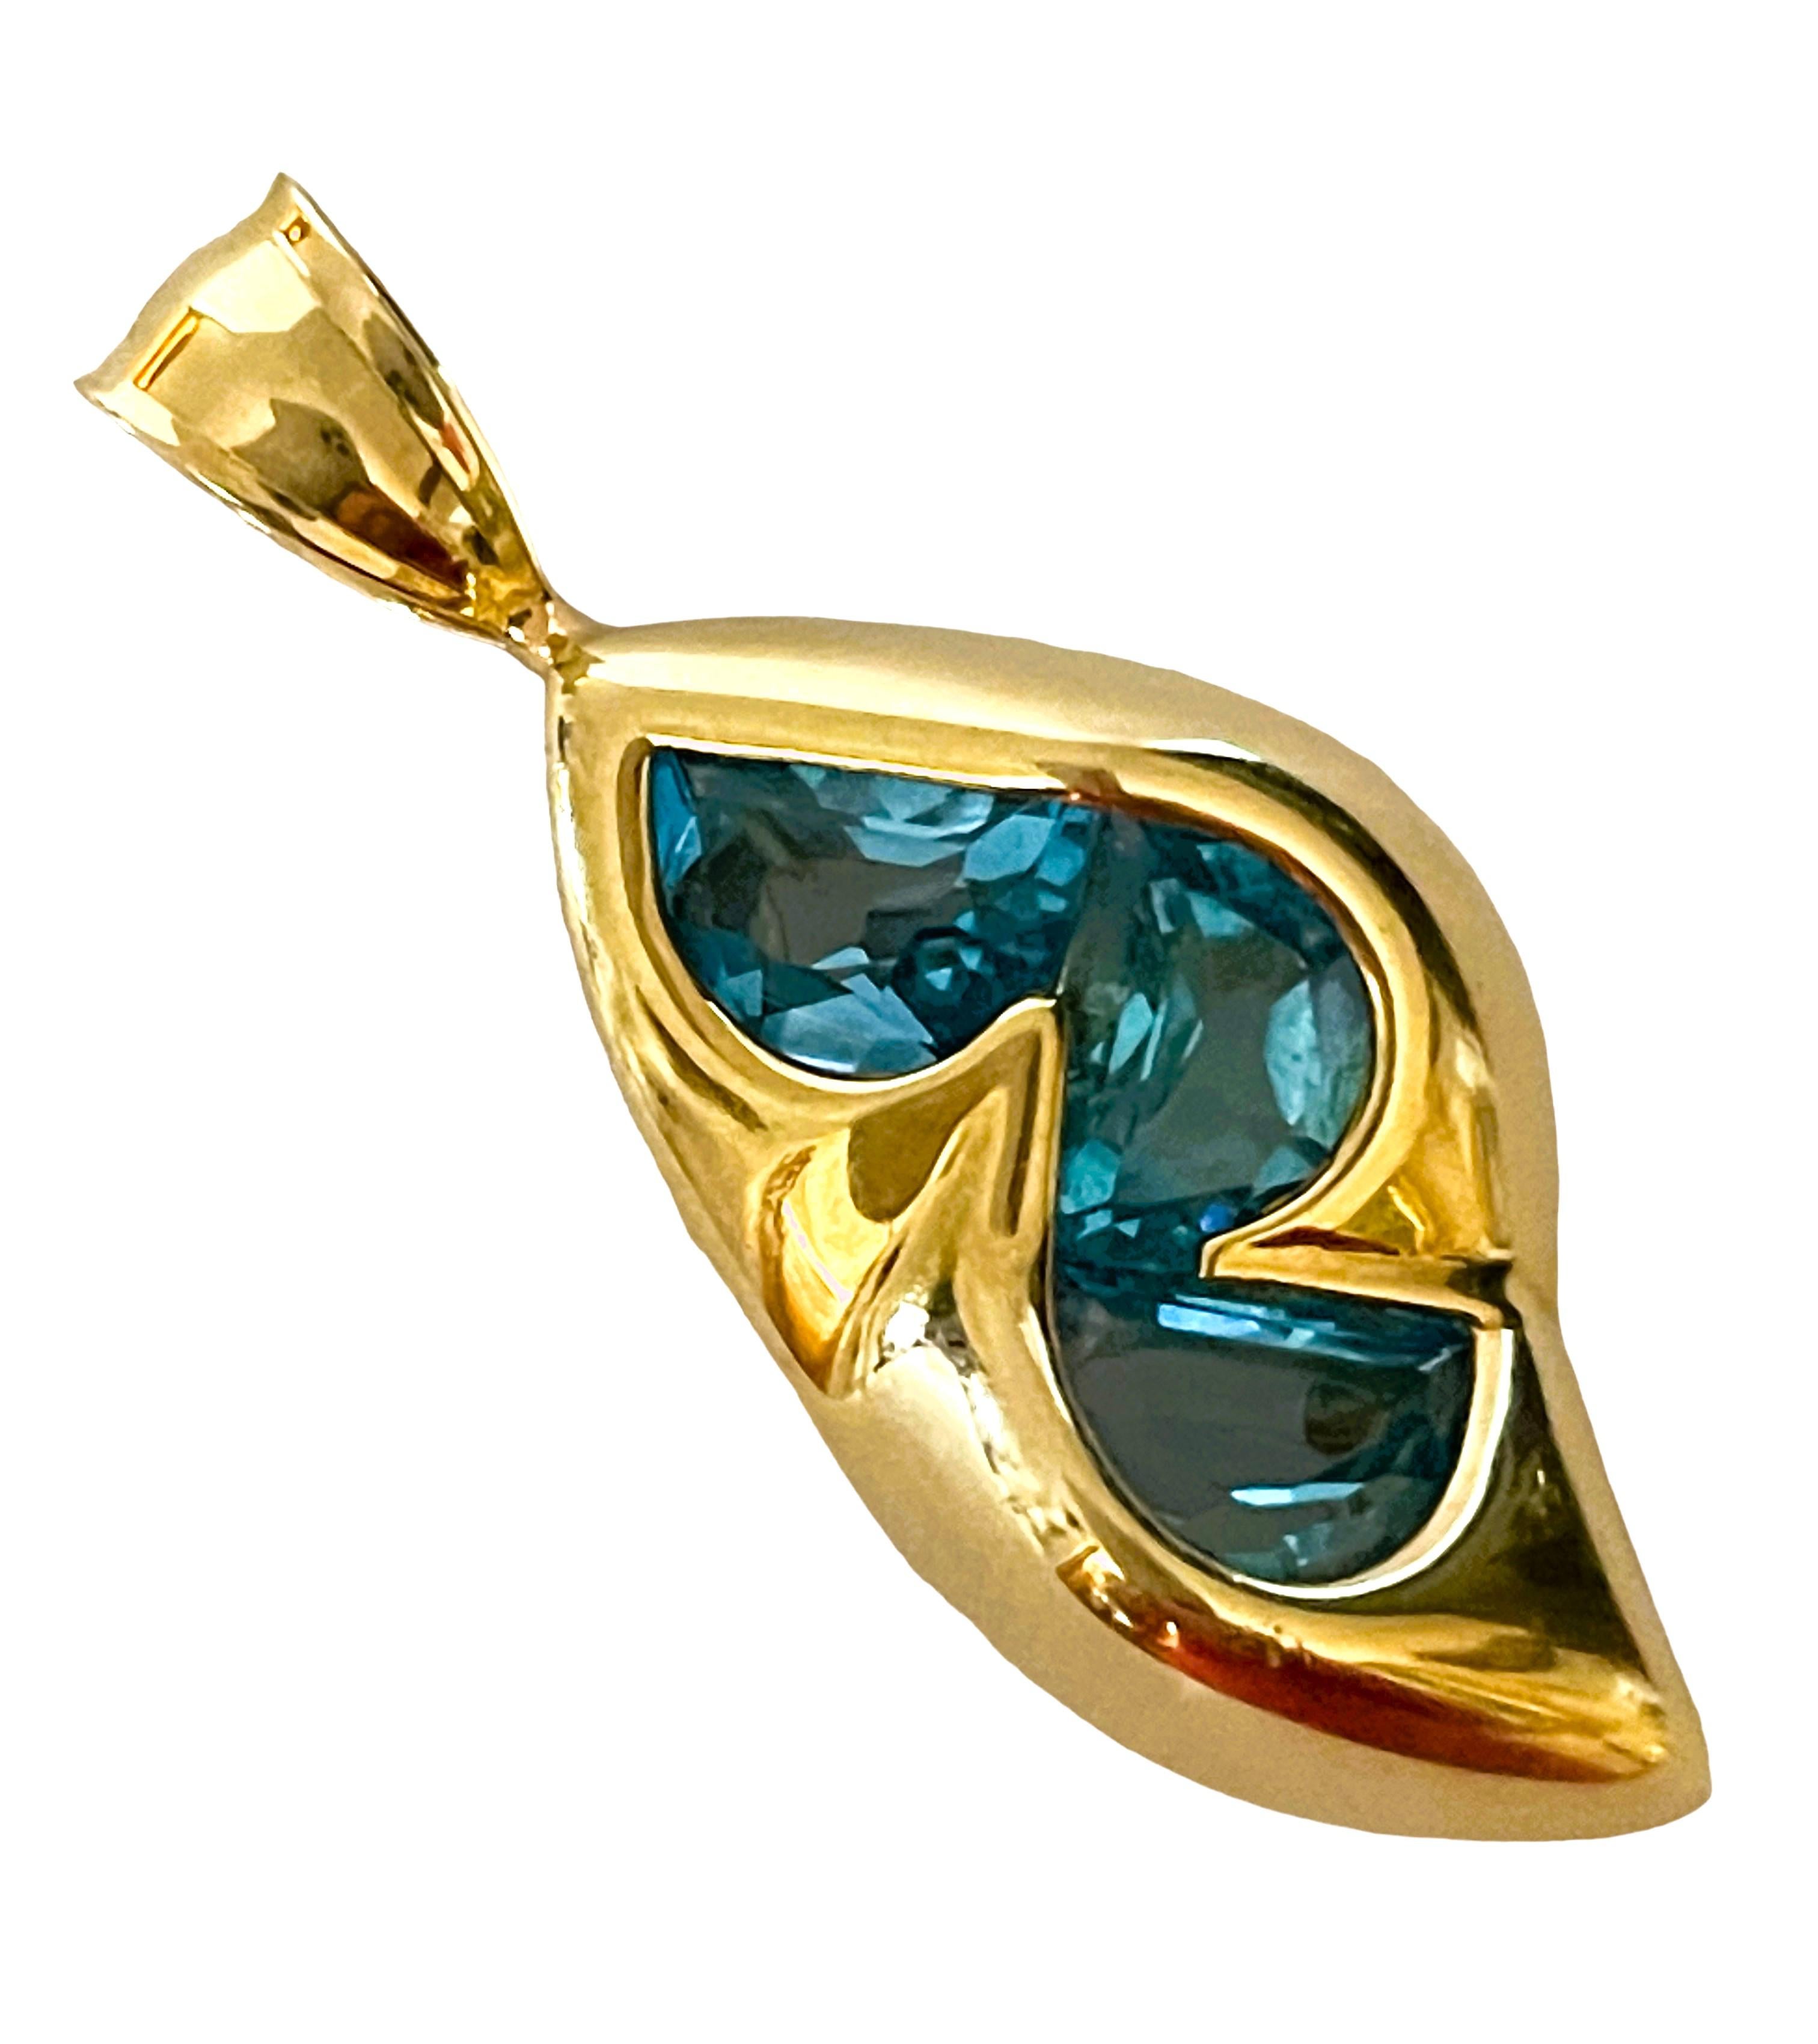 14k Yellow Gold Handmade Fancy Cut Blue Topaz Pendant with Appraisal For Sale 3